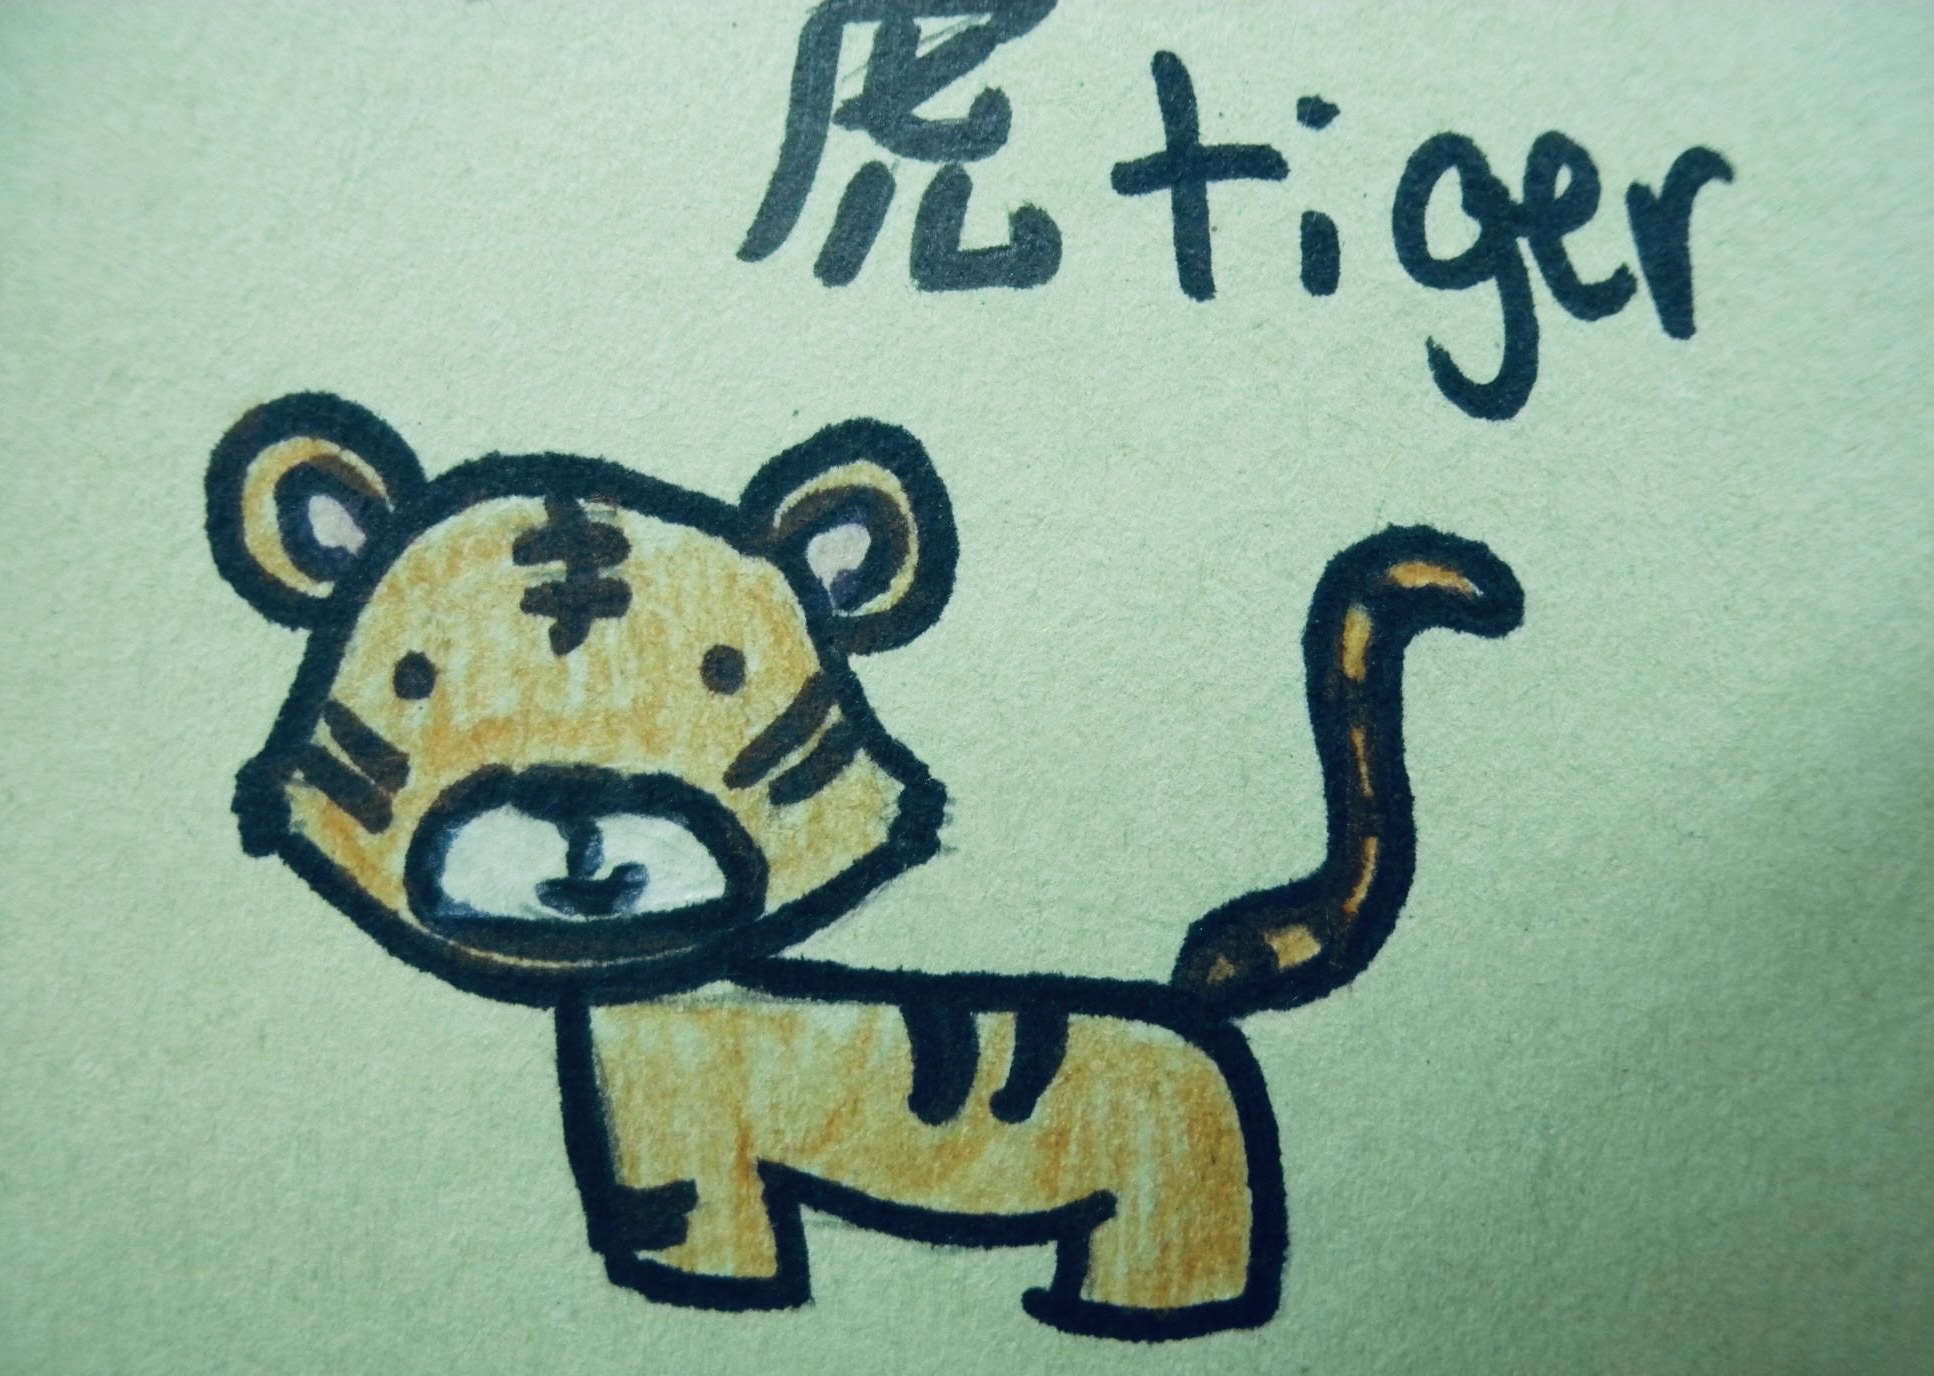 A child's drawing of a tiger in crayon and marker